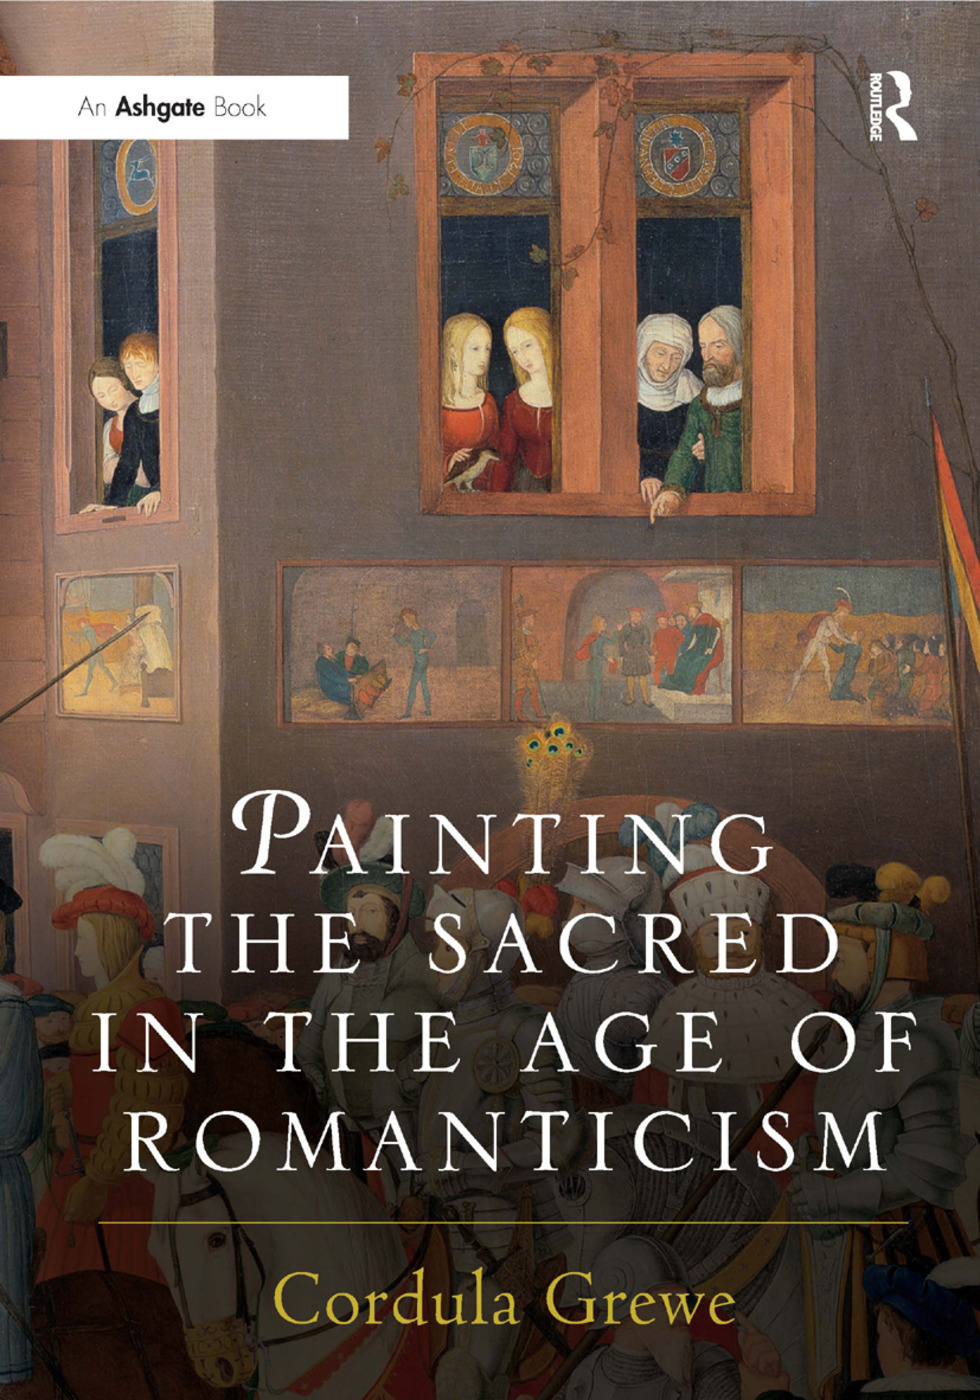 Painting the Sacred in the Age of Romanticism